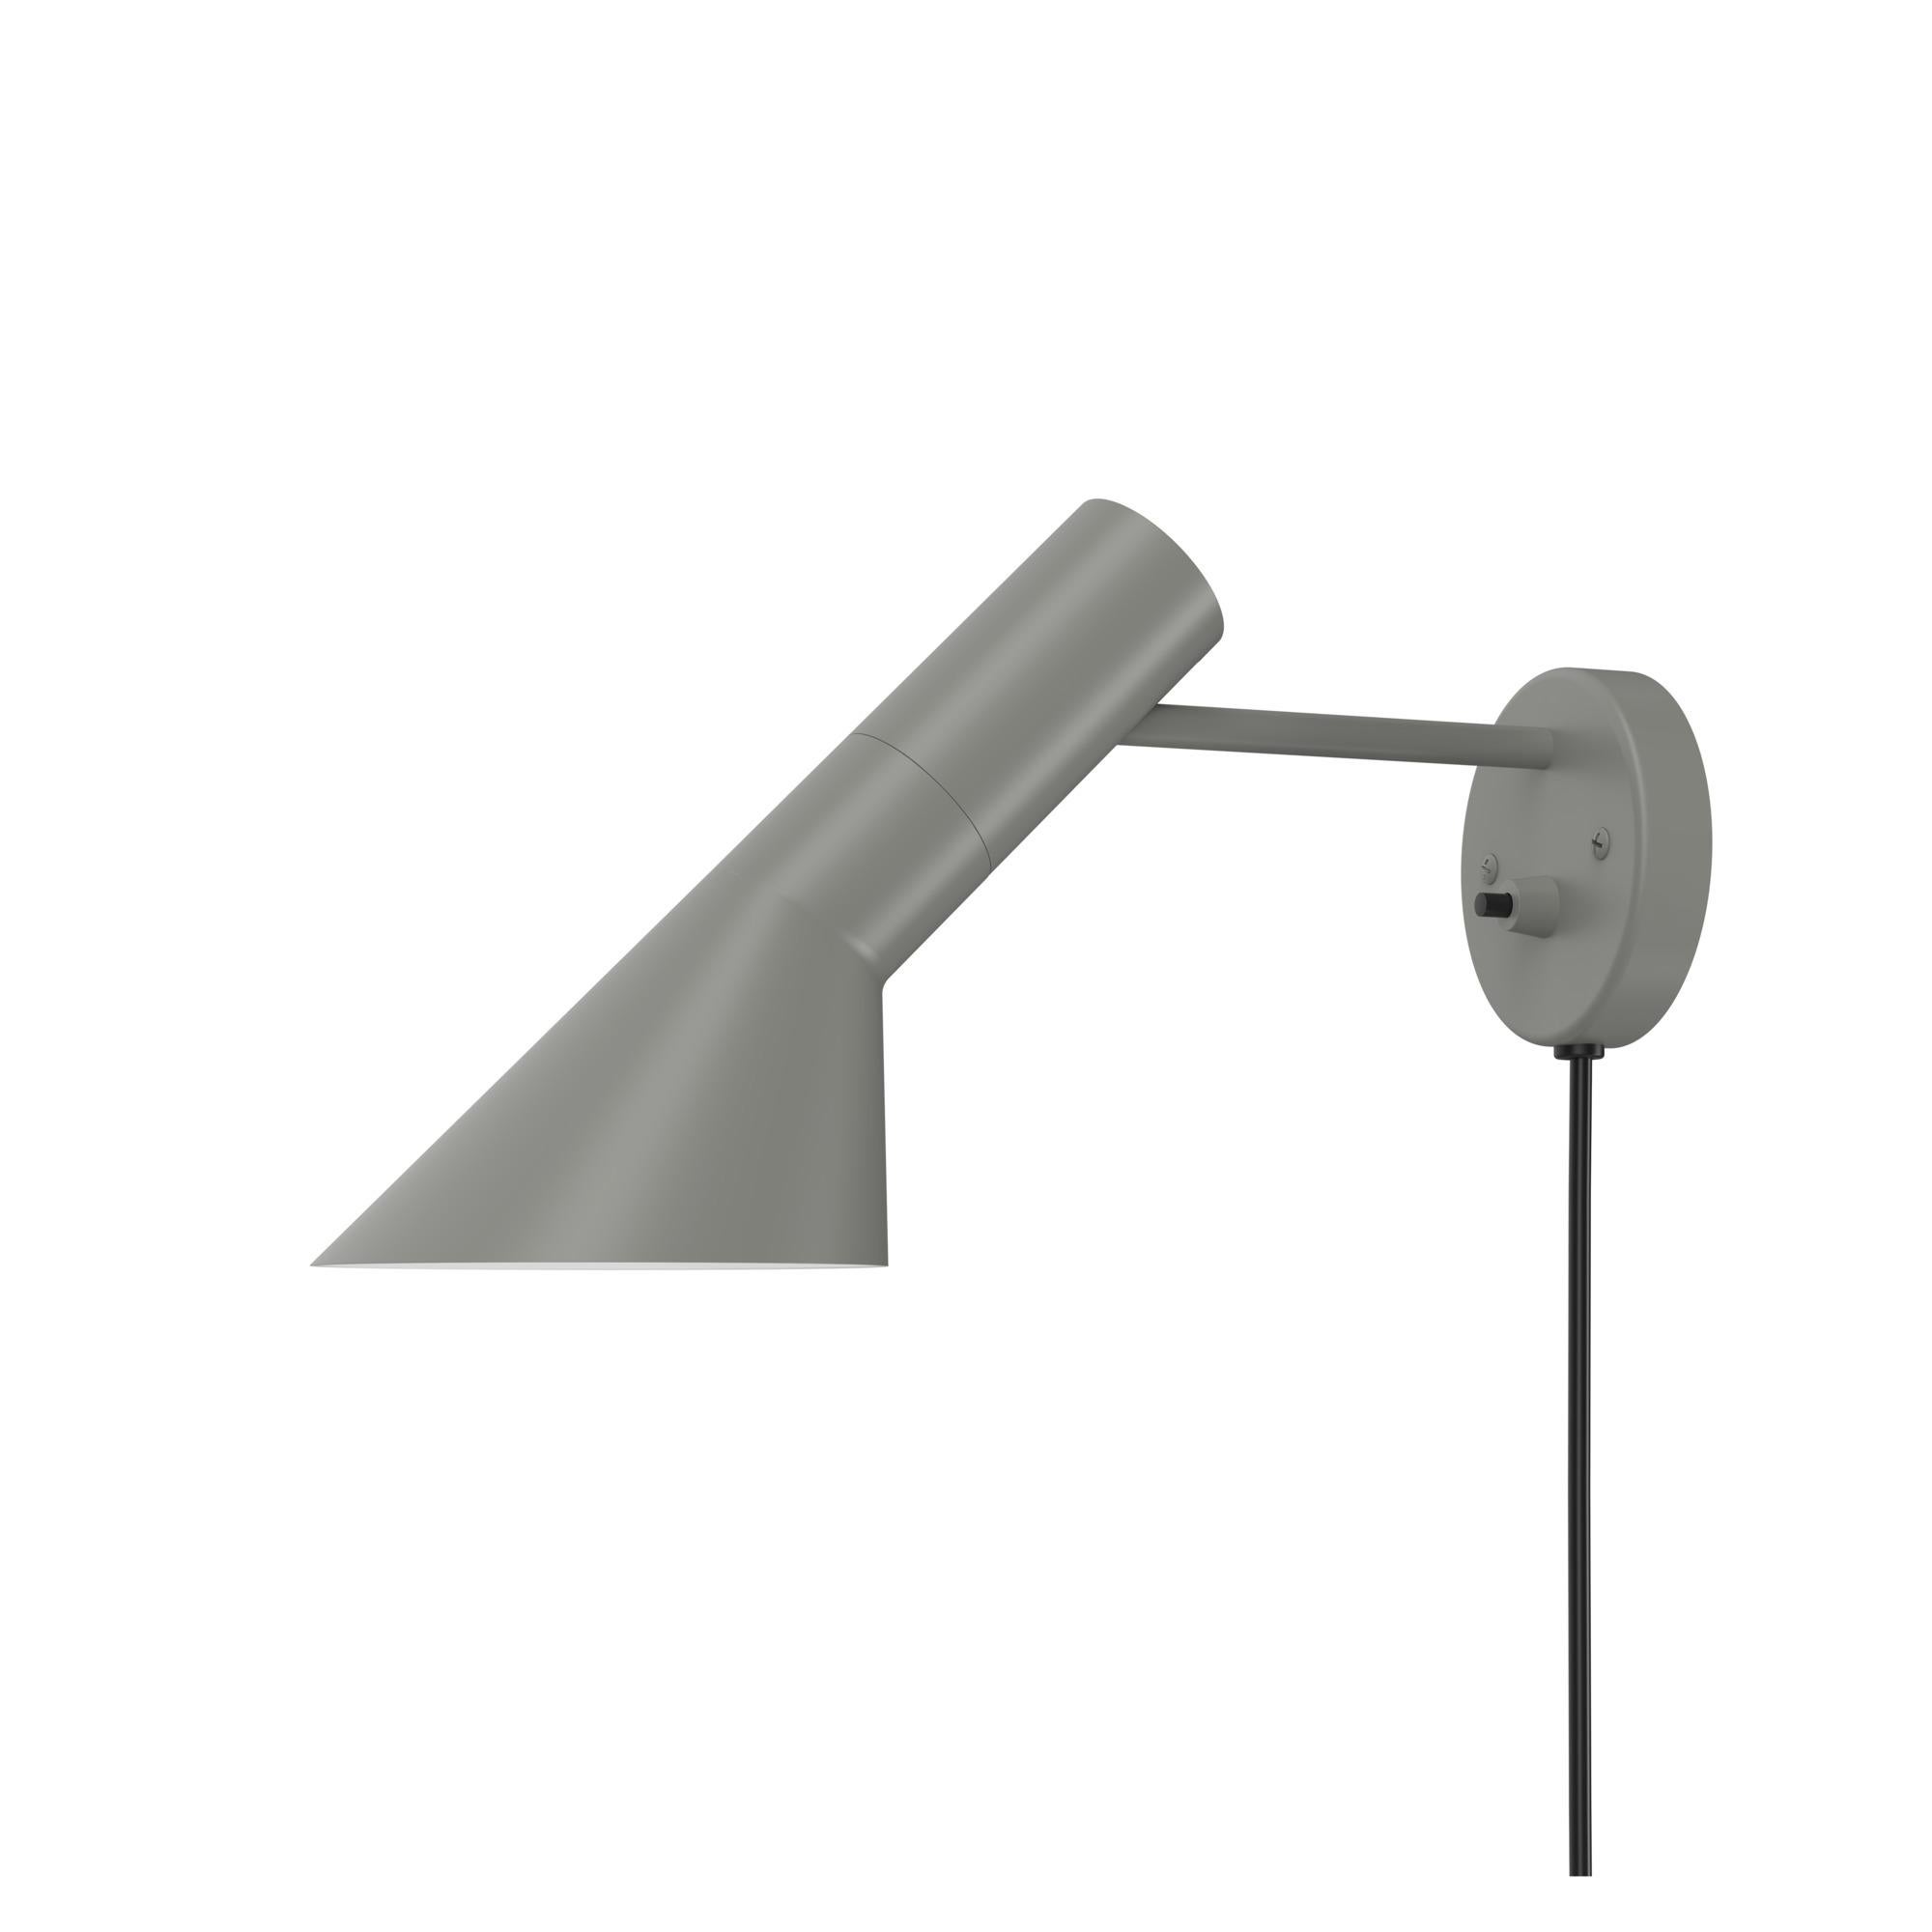 Arne Jacobsen AJ wall light for Louis Poulsen in warm grey.
The AJ series was part of the lighting Jacobsen designed for the original SAS Royal Hotel. Today, his furniture and lighting designs are sought after by collectors worldwide. Executed in